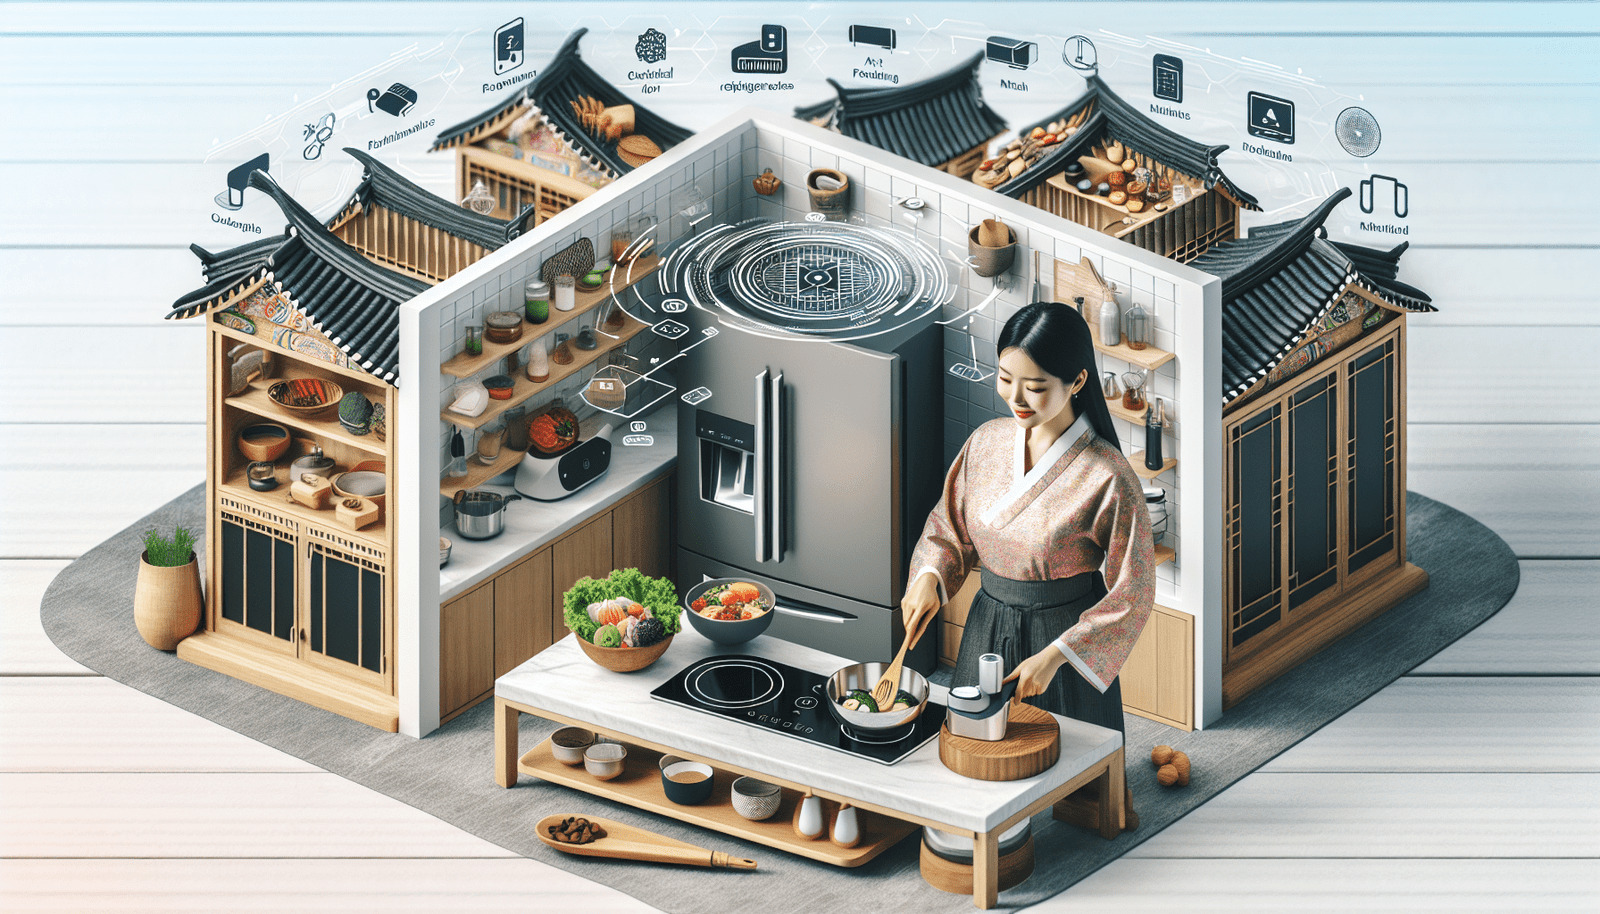 Can You Share Insights Into The Use Of Technology In Korean Home Kitchens?